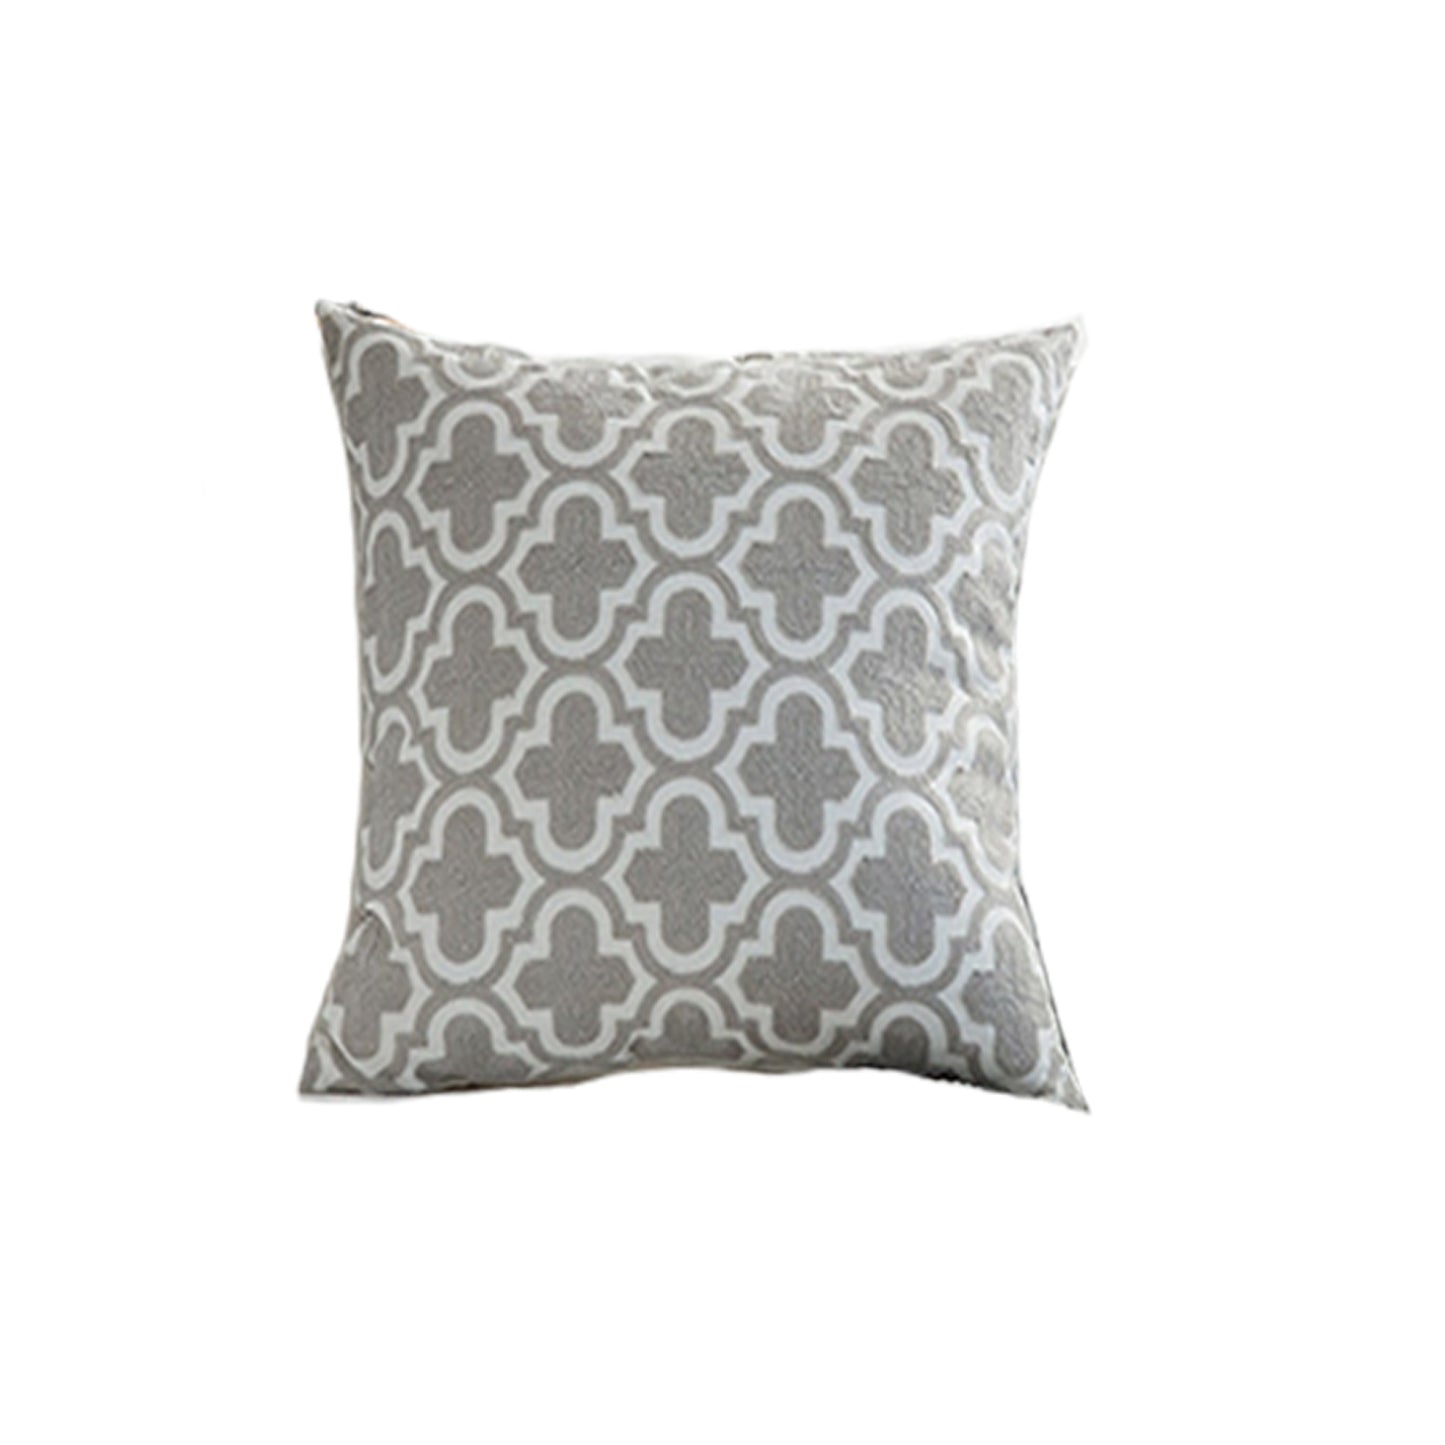 Gray Trellis Embroidered Cushion Cover